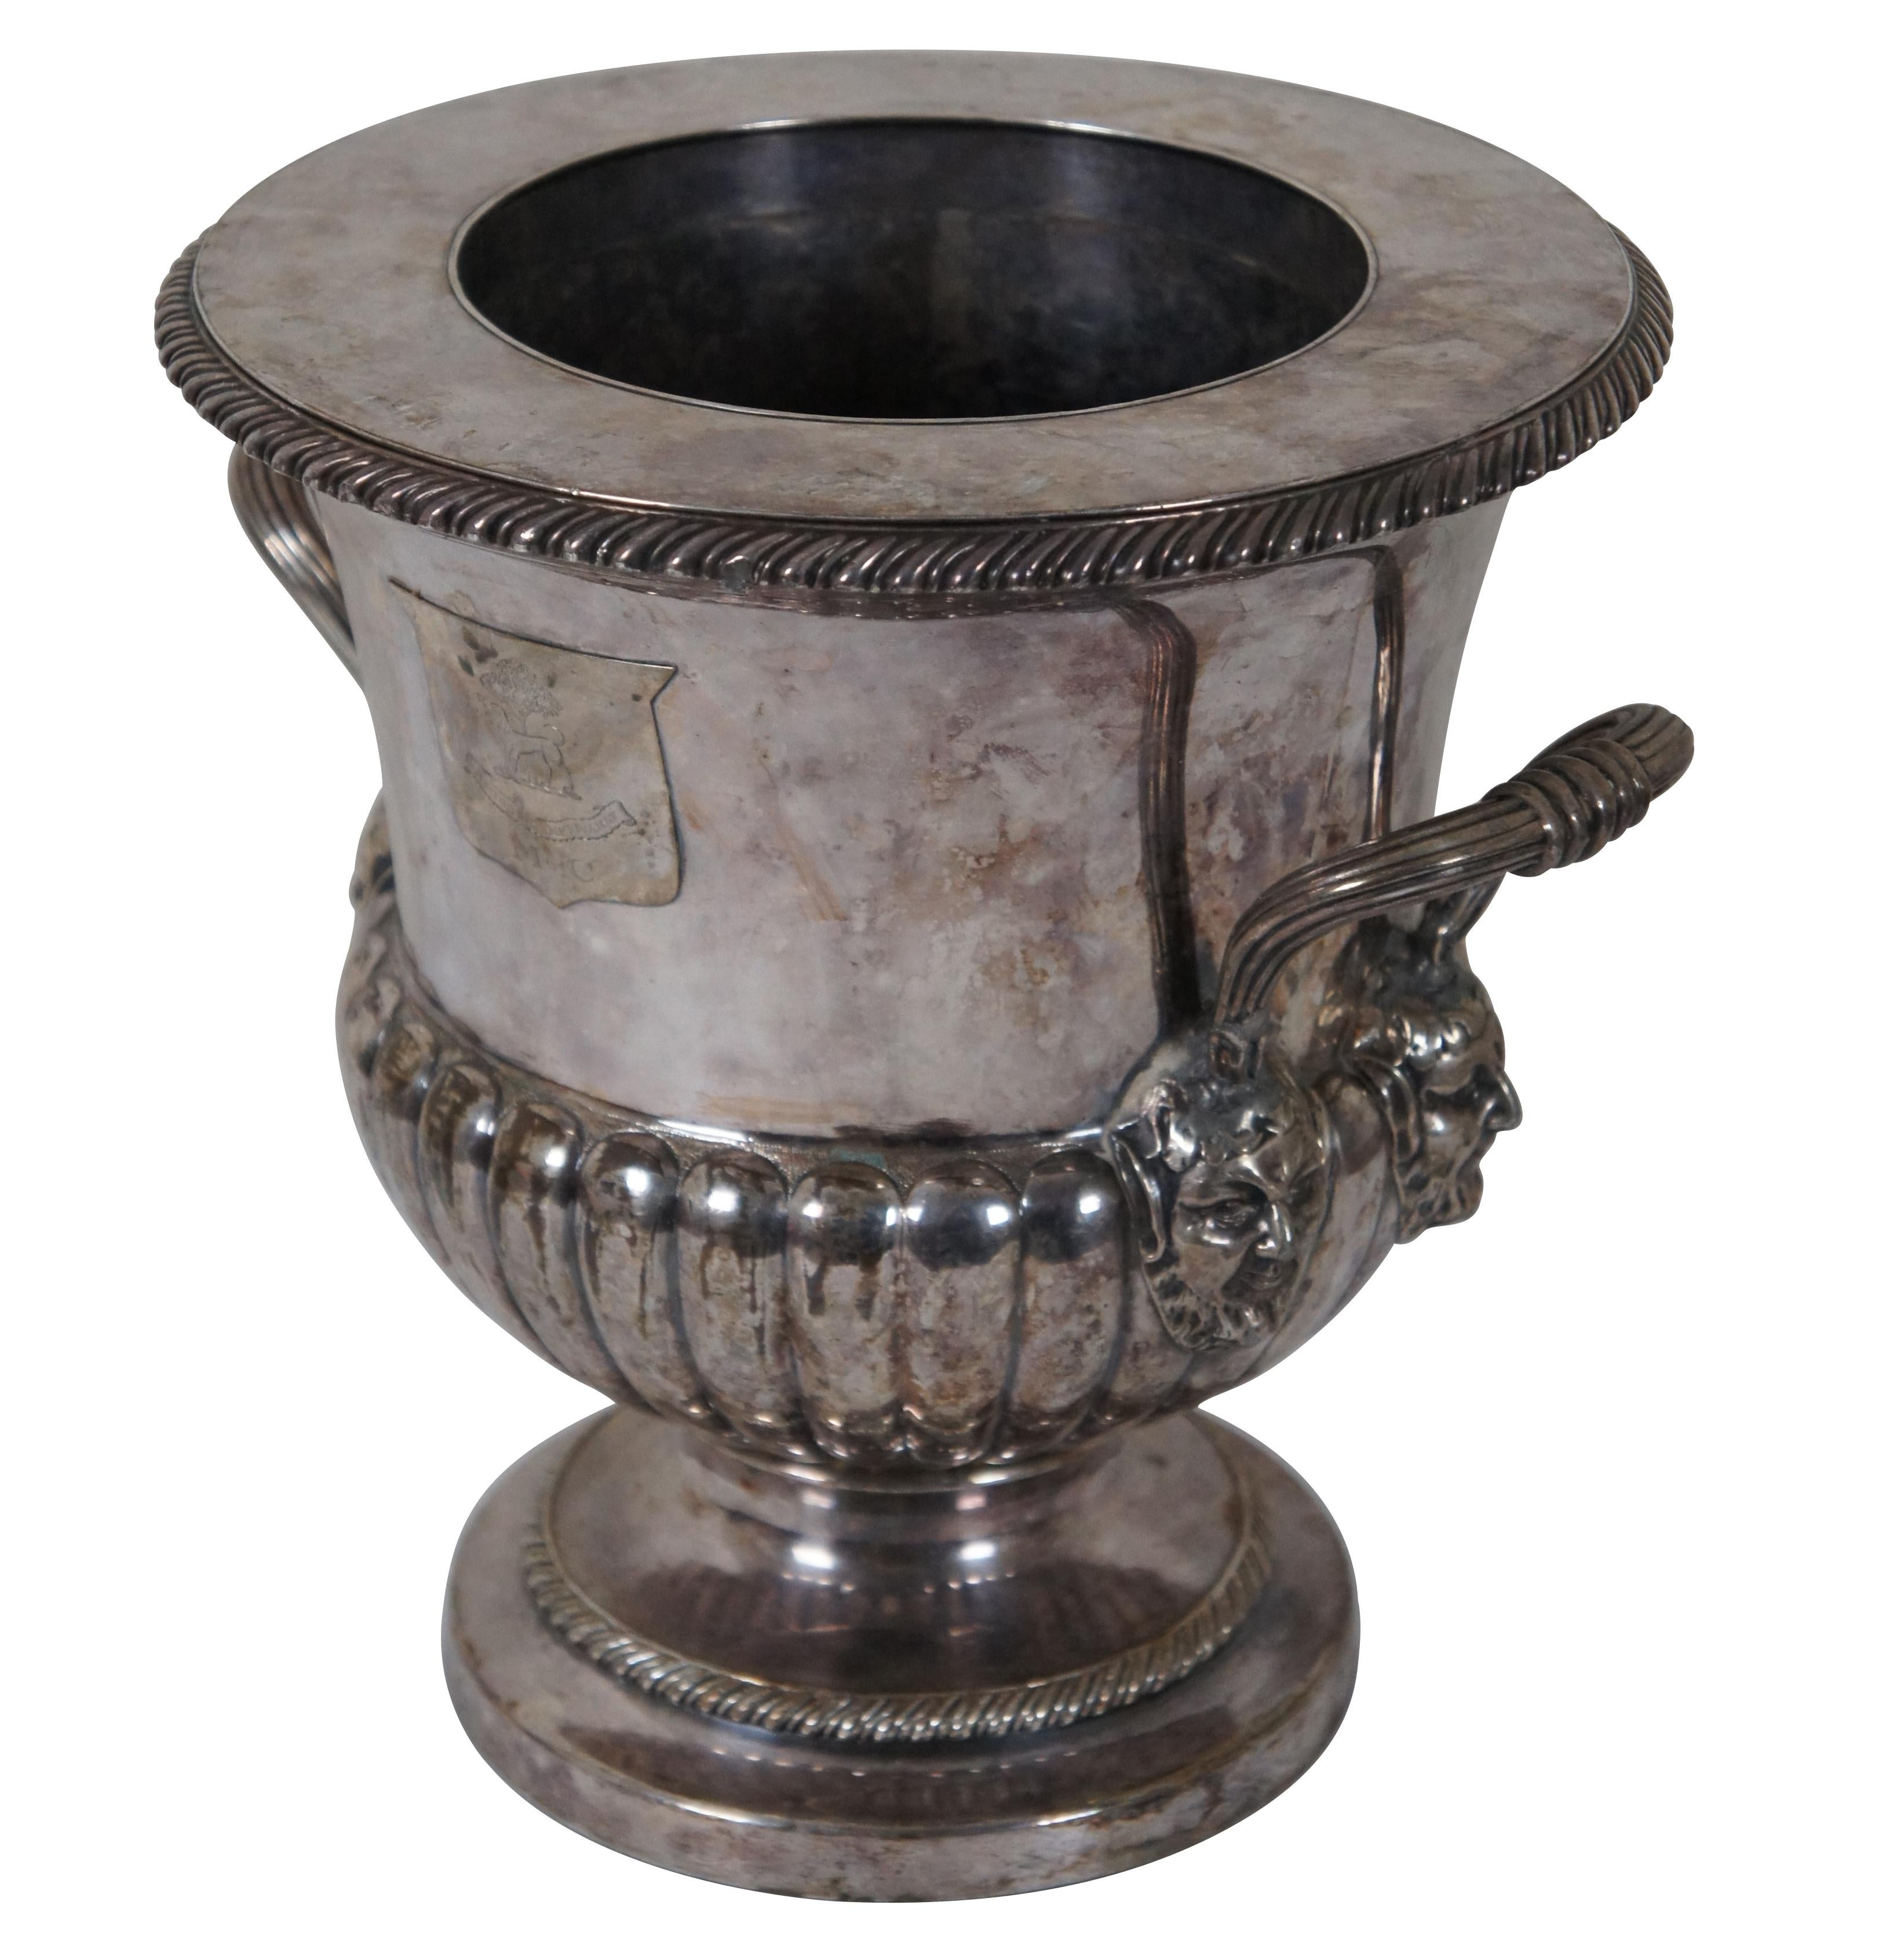 Antique silverplate champagne or wine cooler. Features classic trophy urn form with chased gadrooning throughout. Handled along each side with figural busts of Dionysis or Bacchus the god of grape harvest and wine making. Along the front is a